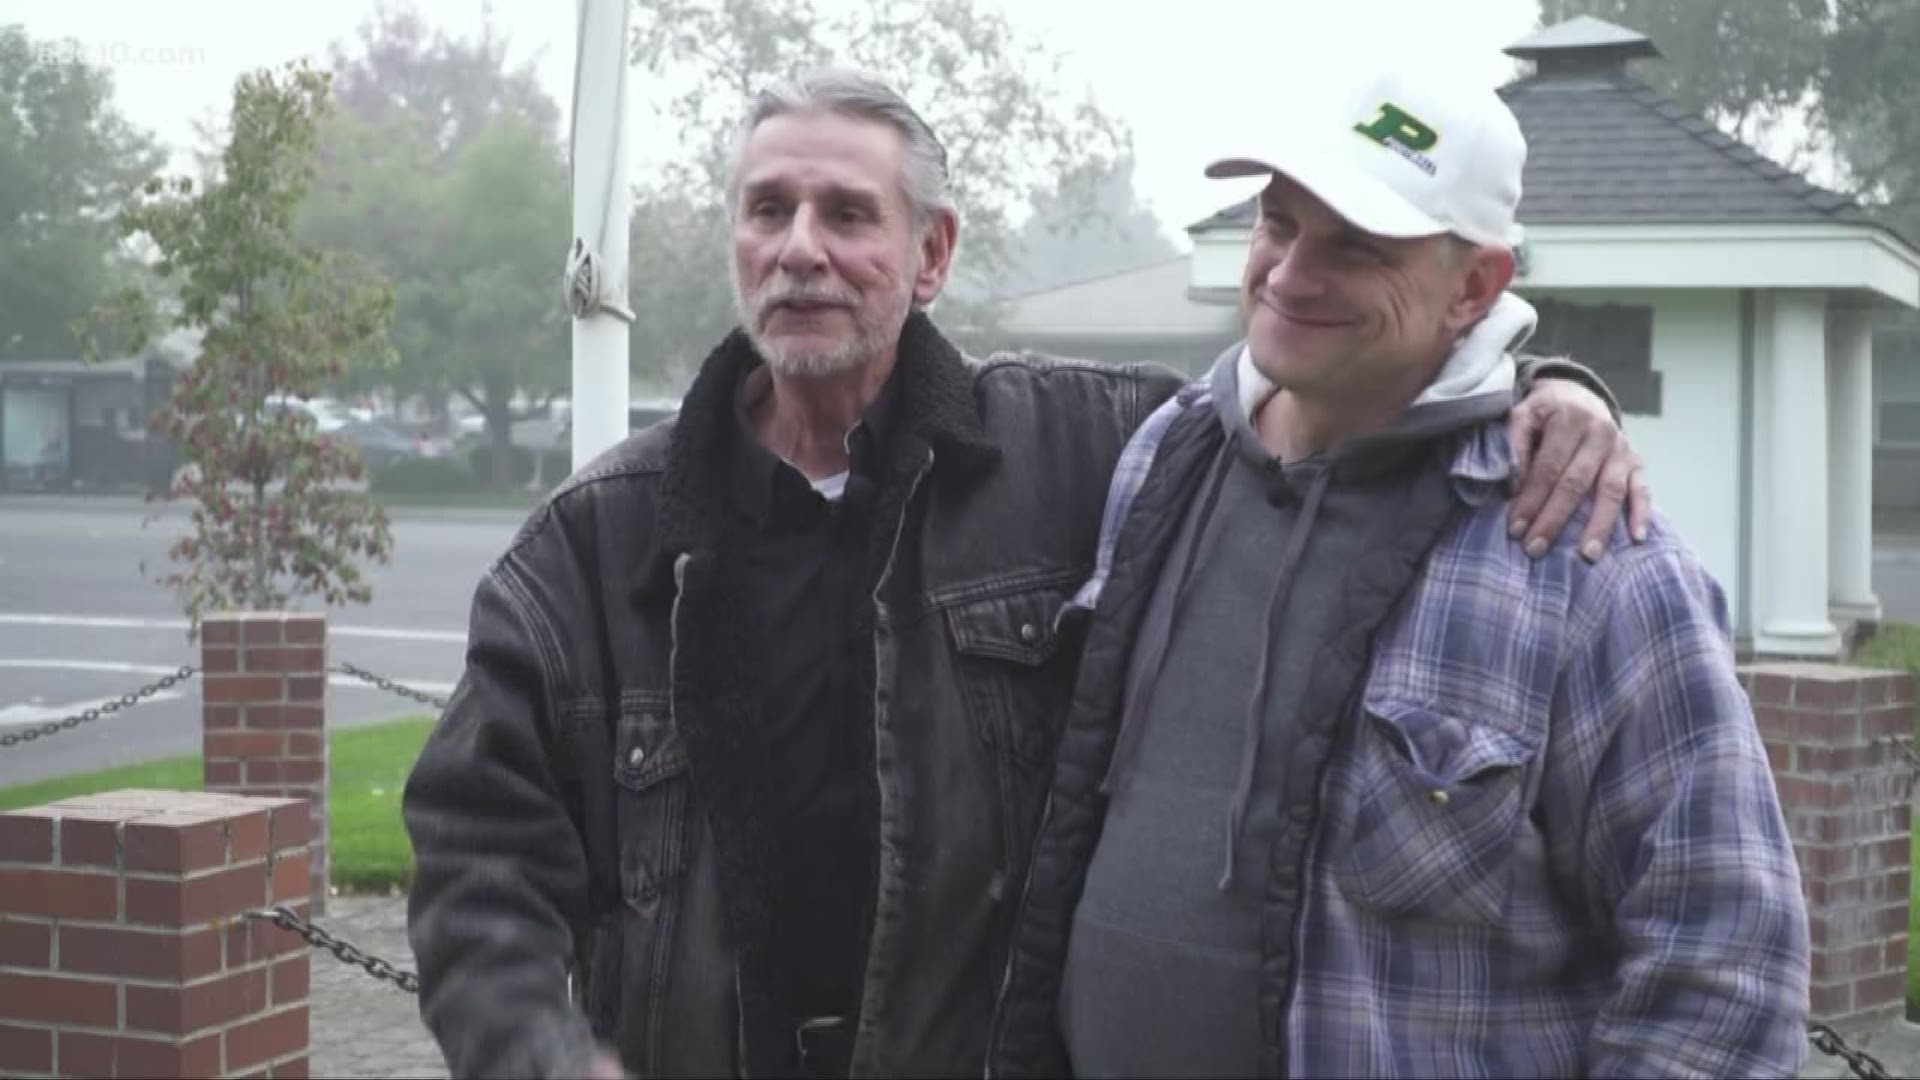 A survivor of the Camp Fire was driving Northbound on Highway 99 to Chico when he spotted someone walking on the side of the highway. As it turned out, the two men had a lot more in common.